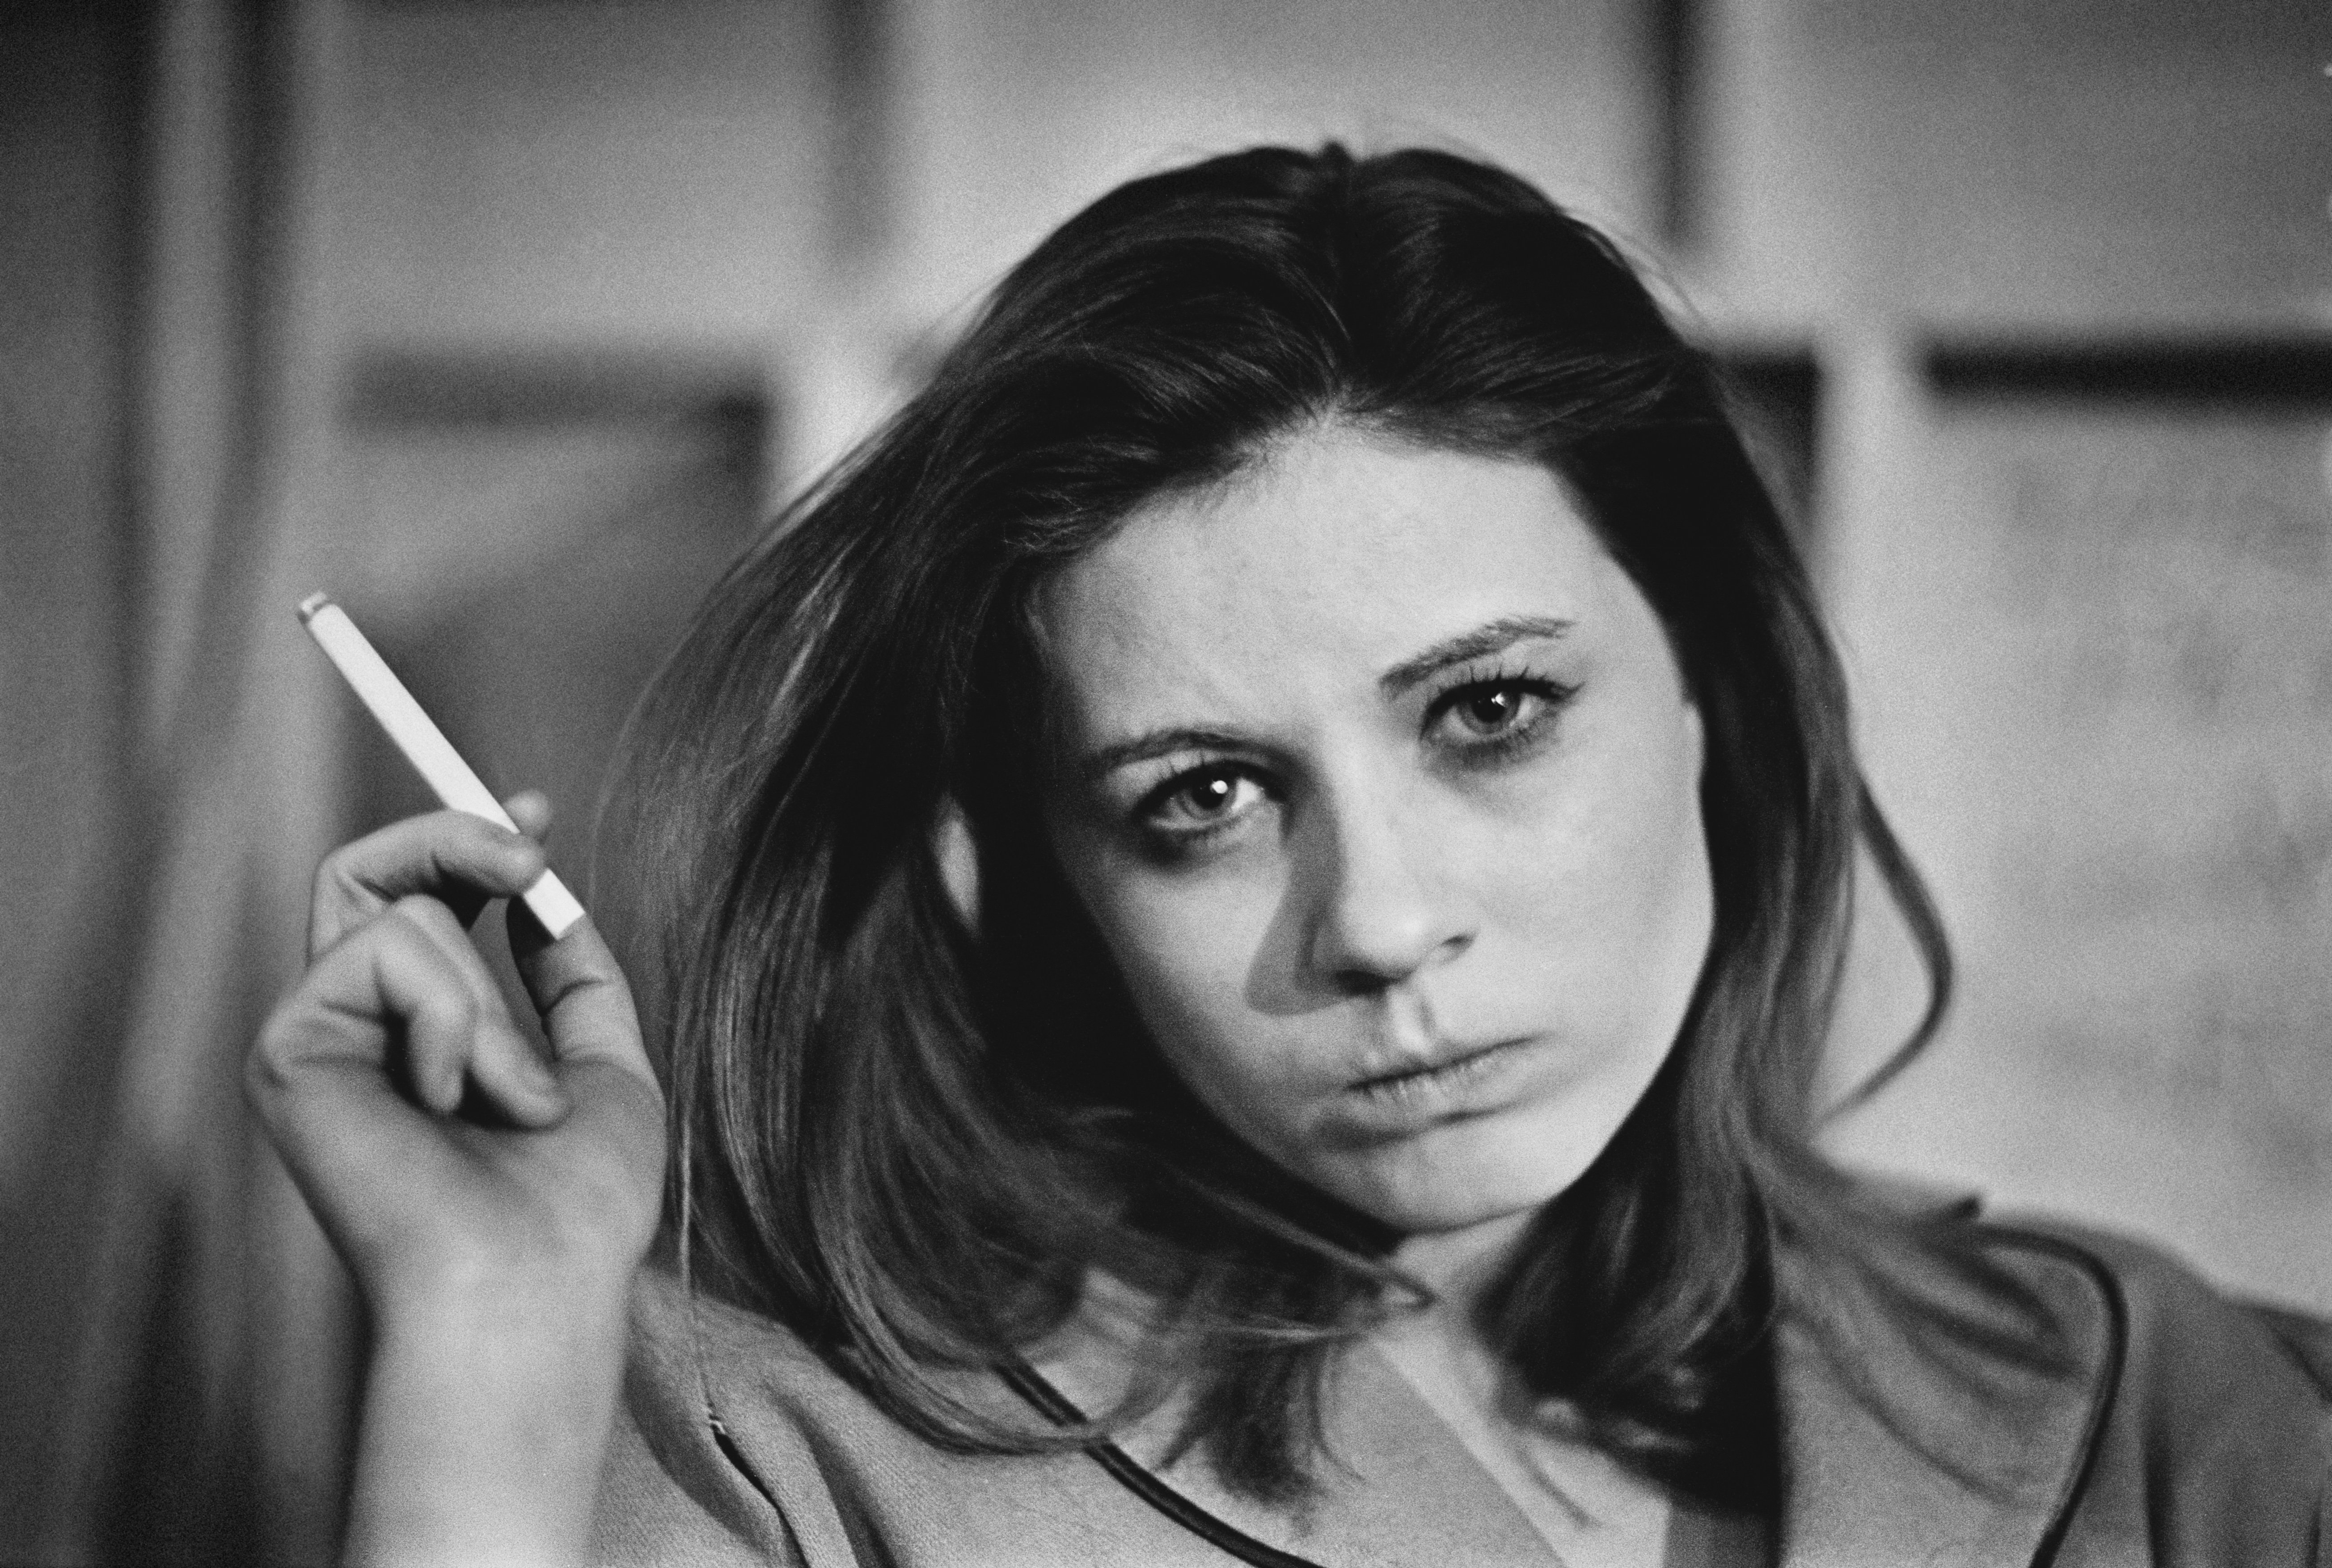 Patty Duke taking a break from filming on the set of "Valley of the Dolls," on April 24, 1967. Photo: Getty Images